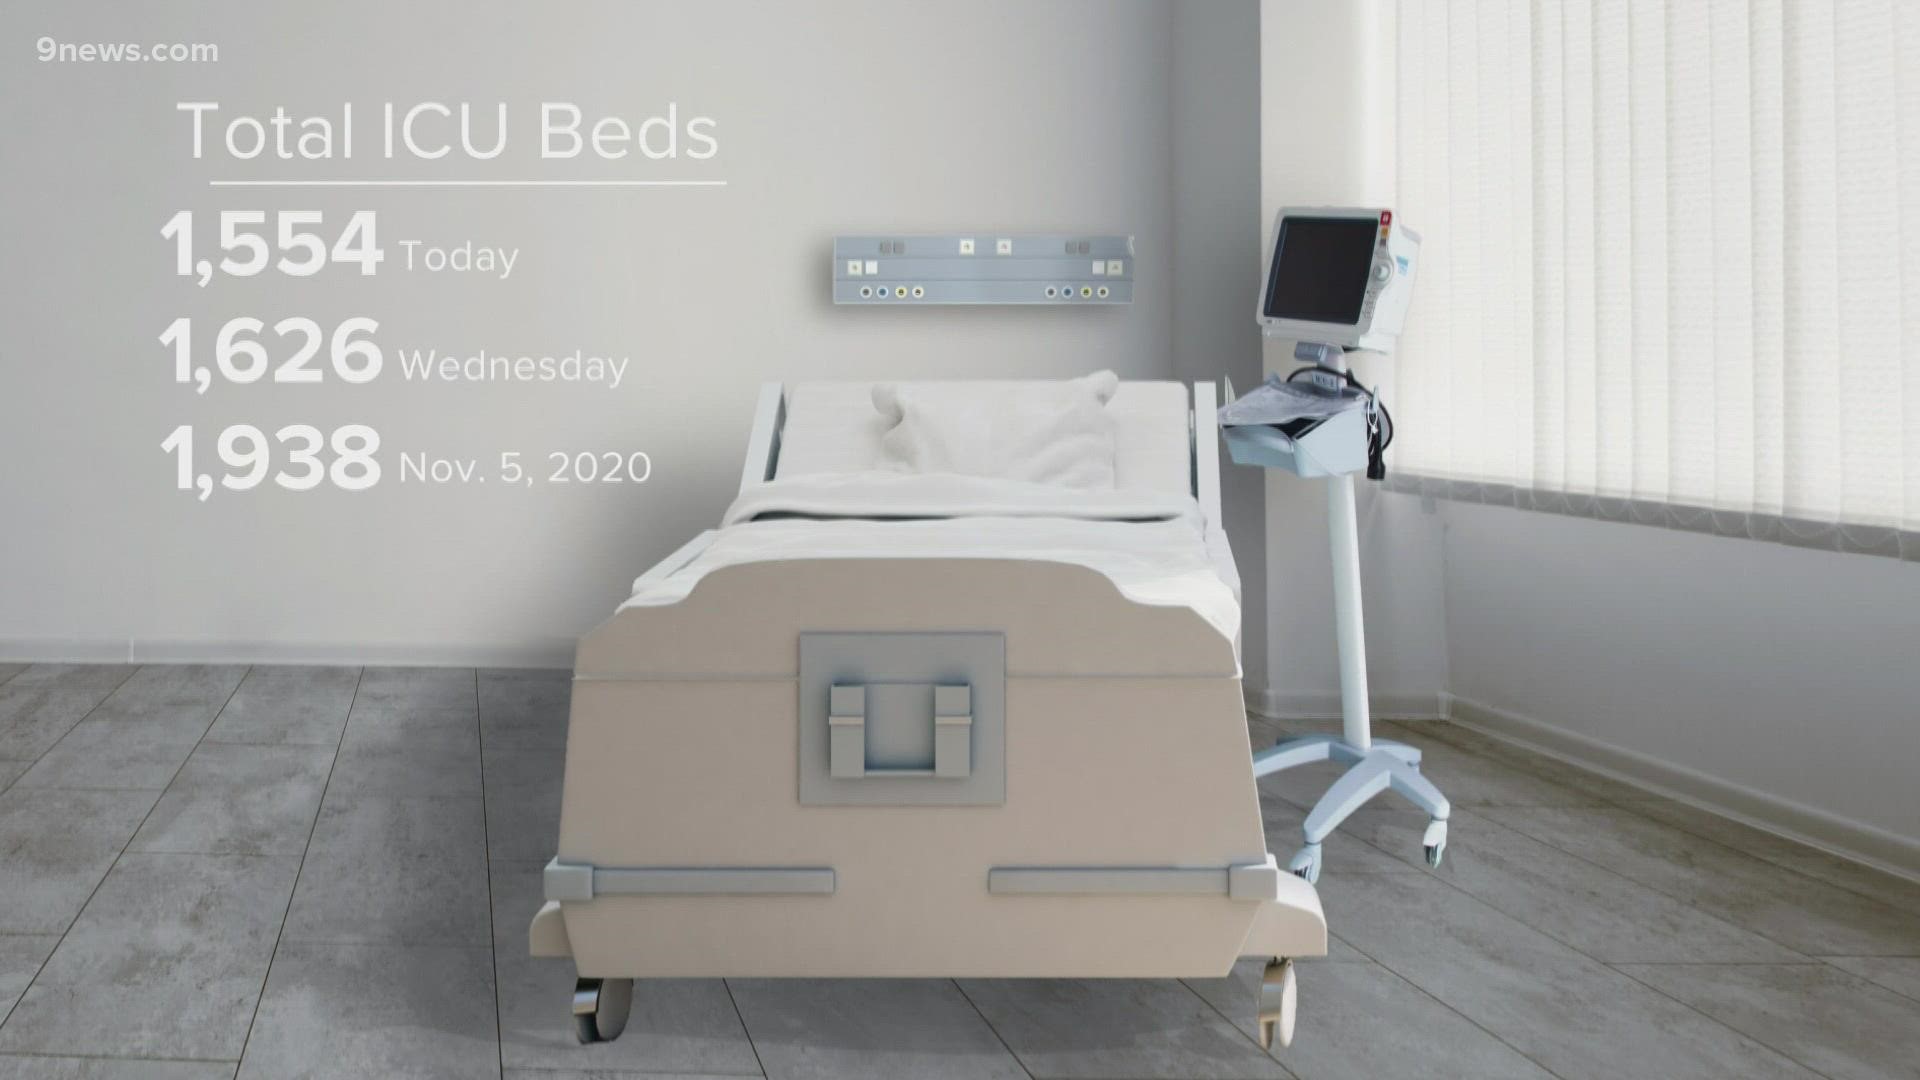 There are 84 ICU beds open in Colorado right now, and the number is steadily going down. There aren't enough staff to man any more.